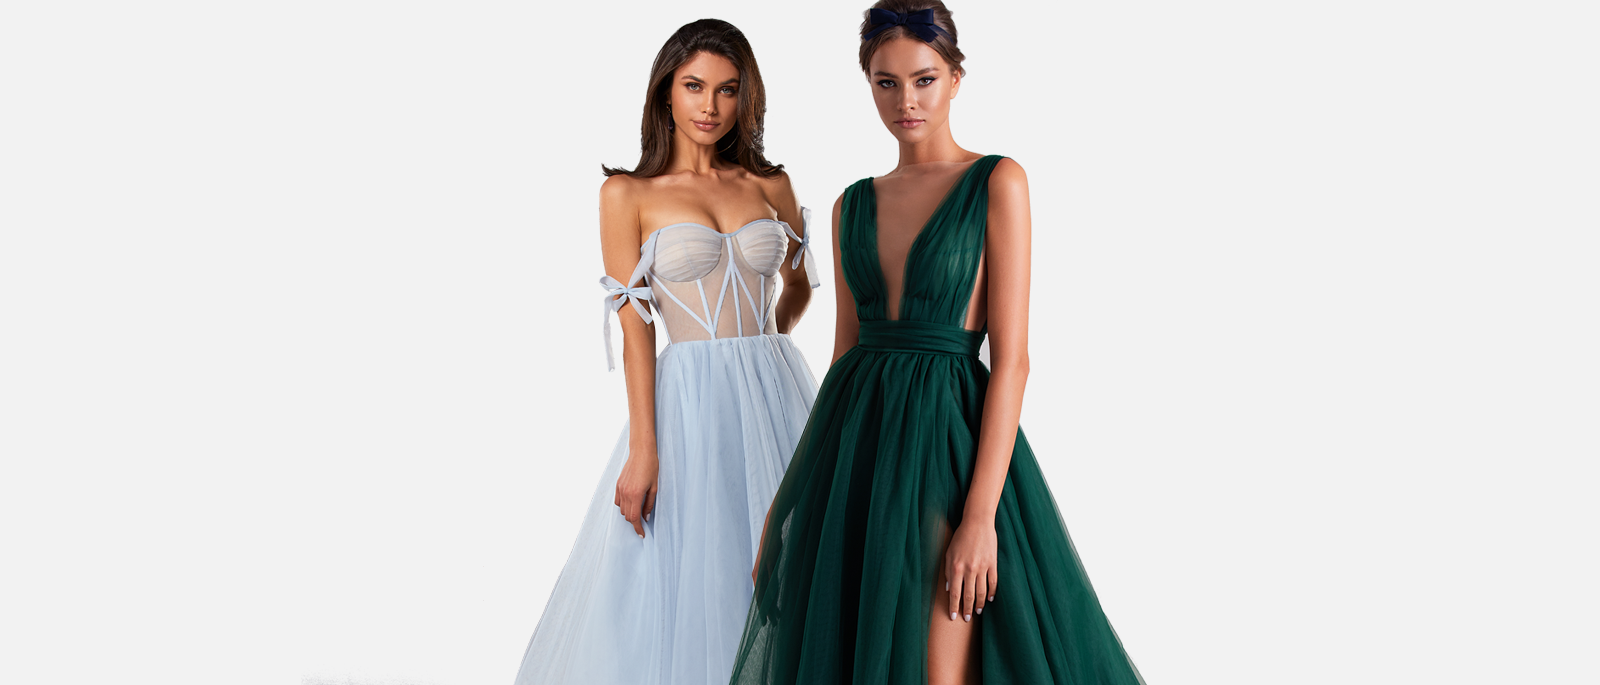 Royal blue and emerald green dresses